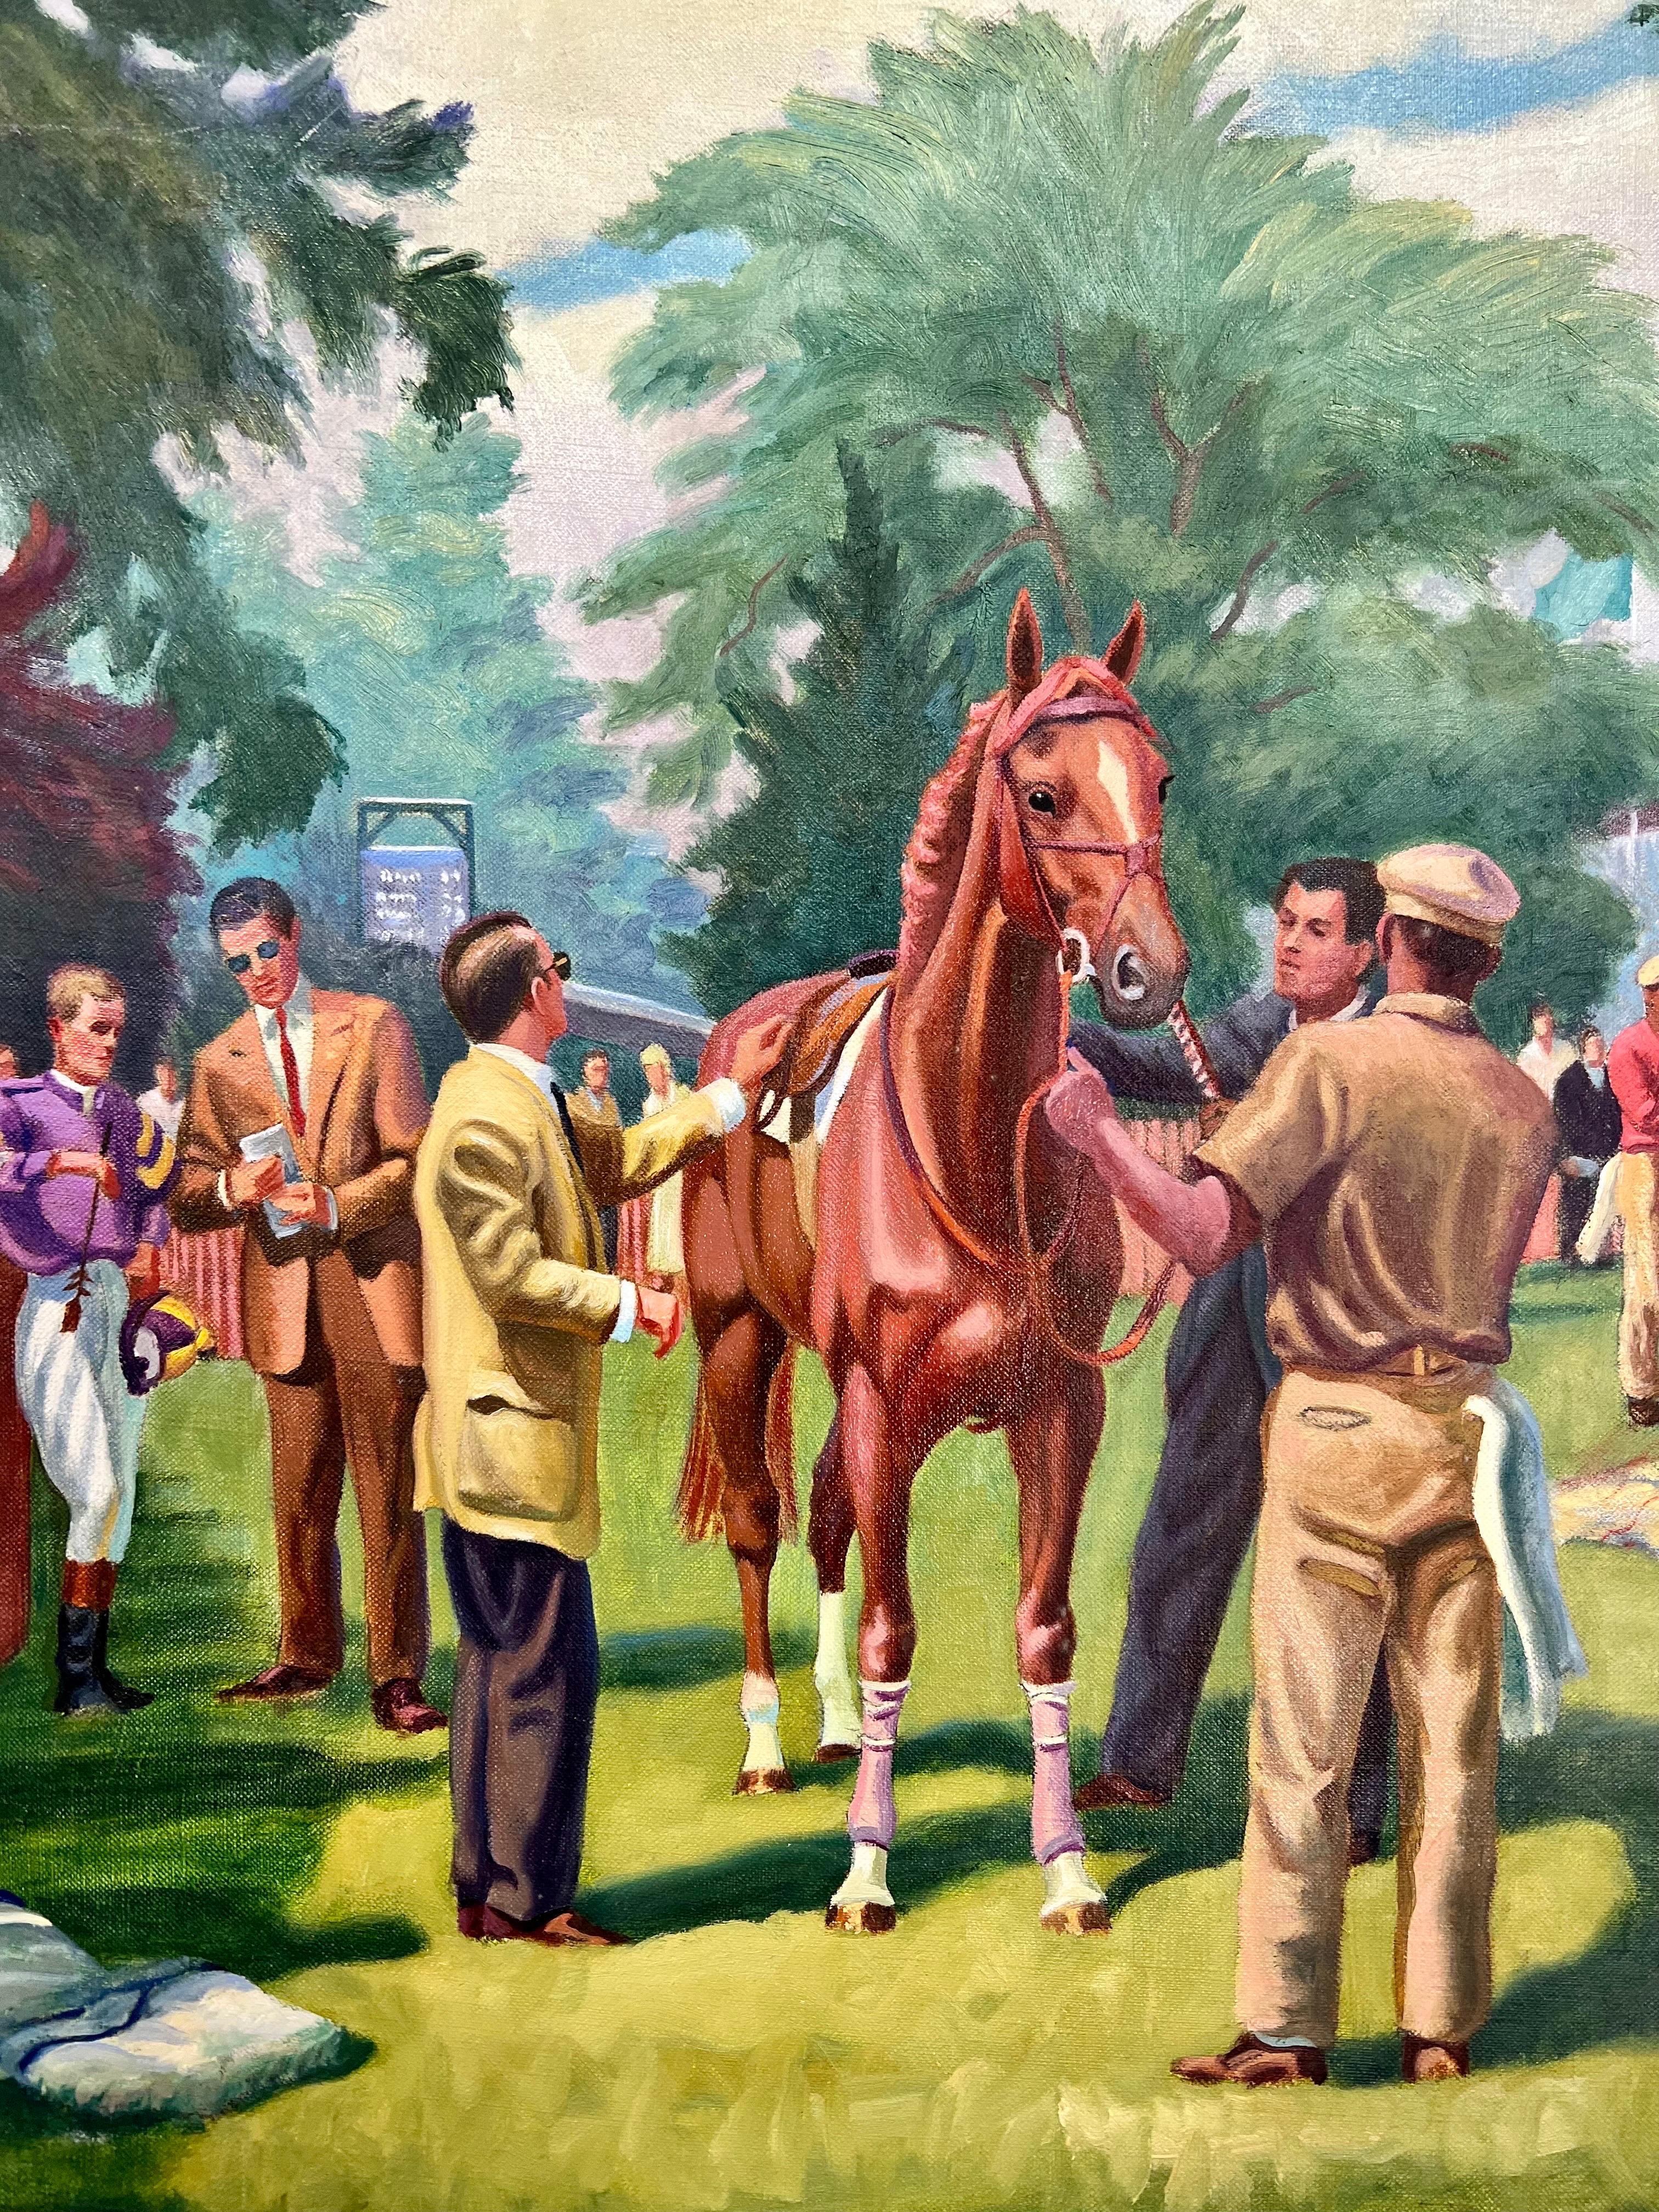 Original oil painting by noted New England artist E. Tomasiewicz depicting horses before the steeplechase. Displayed in a wood and gold frame. Signed and dated lower right, 1957.